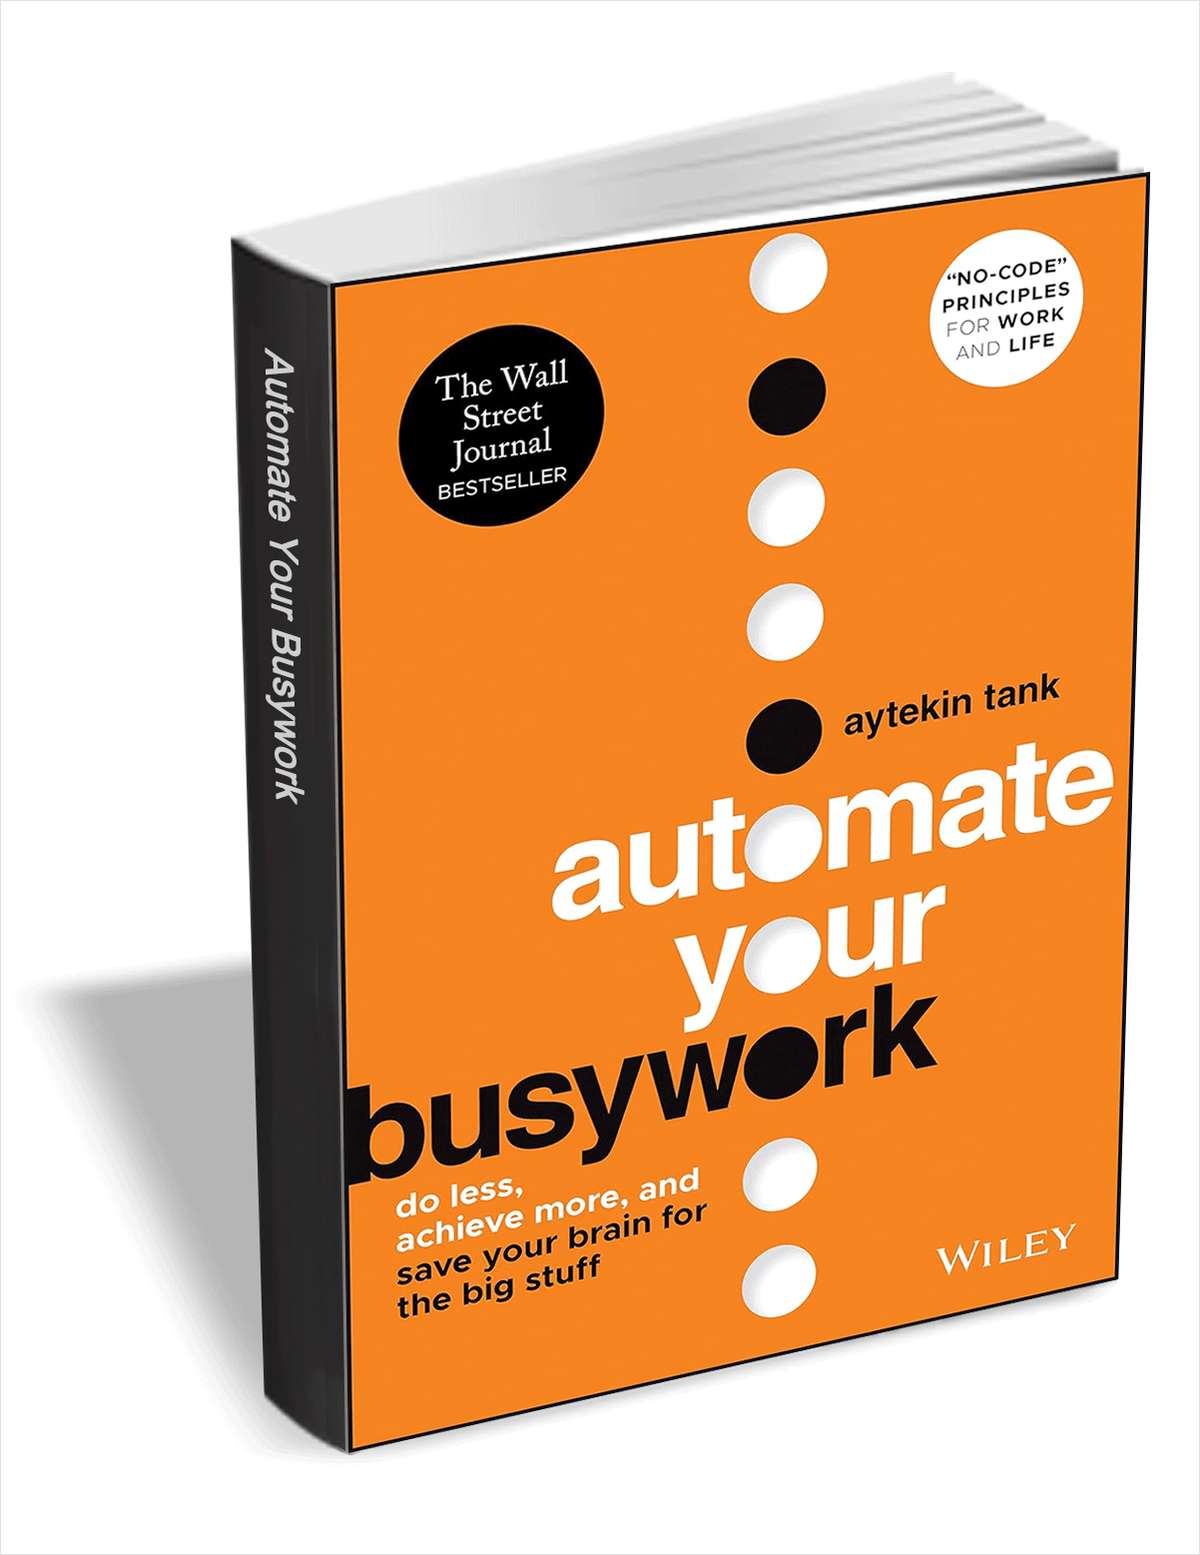 Automate Your Busywork: Do Less, Achieve More, and Save Your Brain for the Big Stuff ($17.00 Value) FREE for a Limited Time